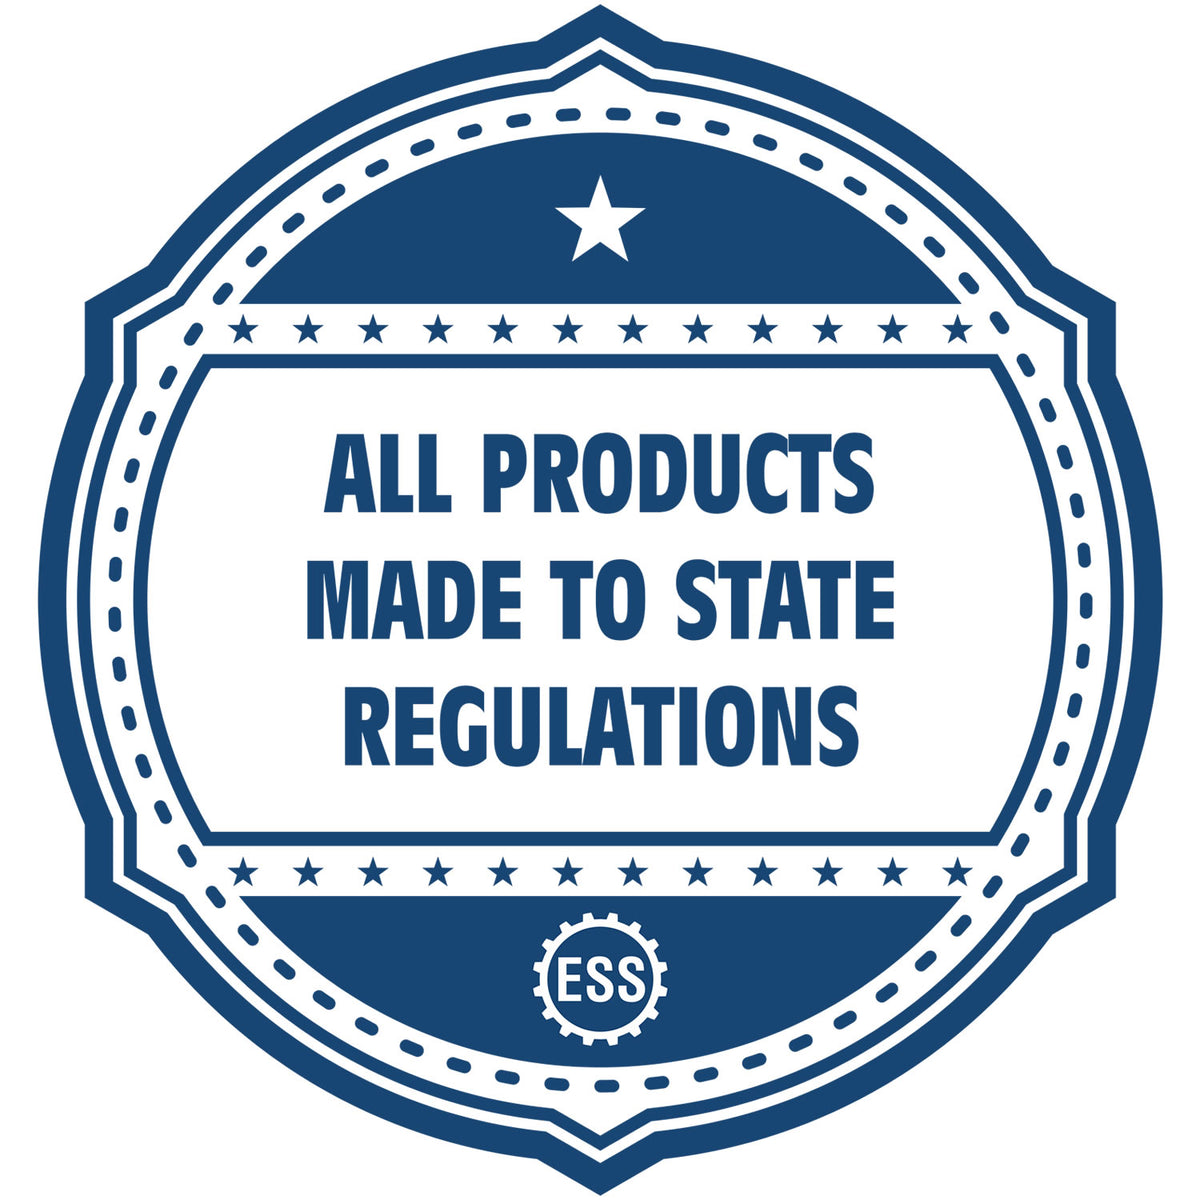 A blue icon or badge for the Gift Rhode Island Architect Seal showing that this product is made in compliance with state regulations.